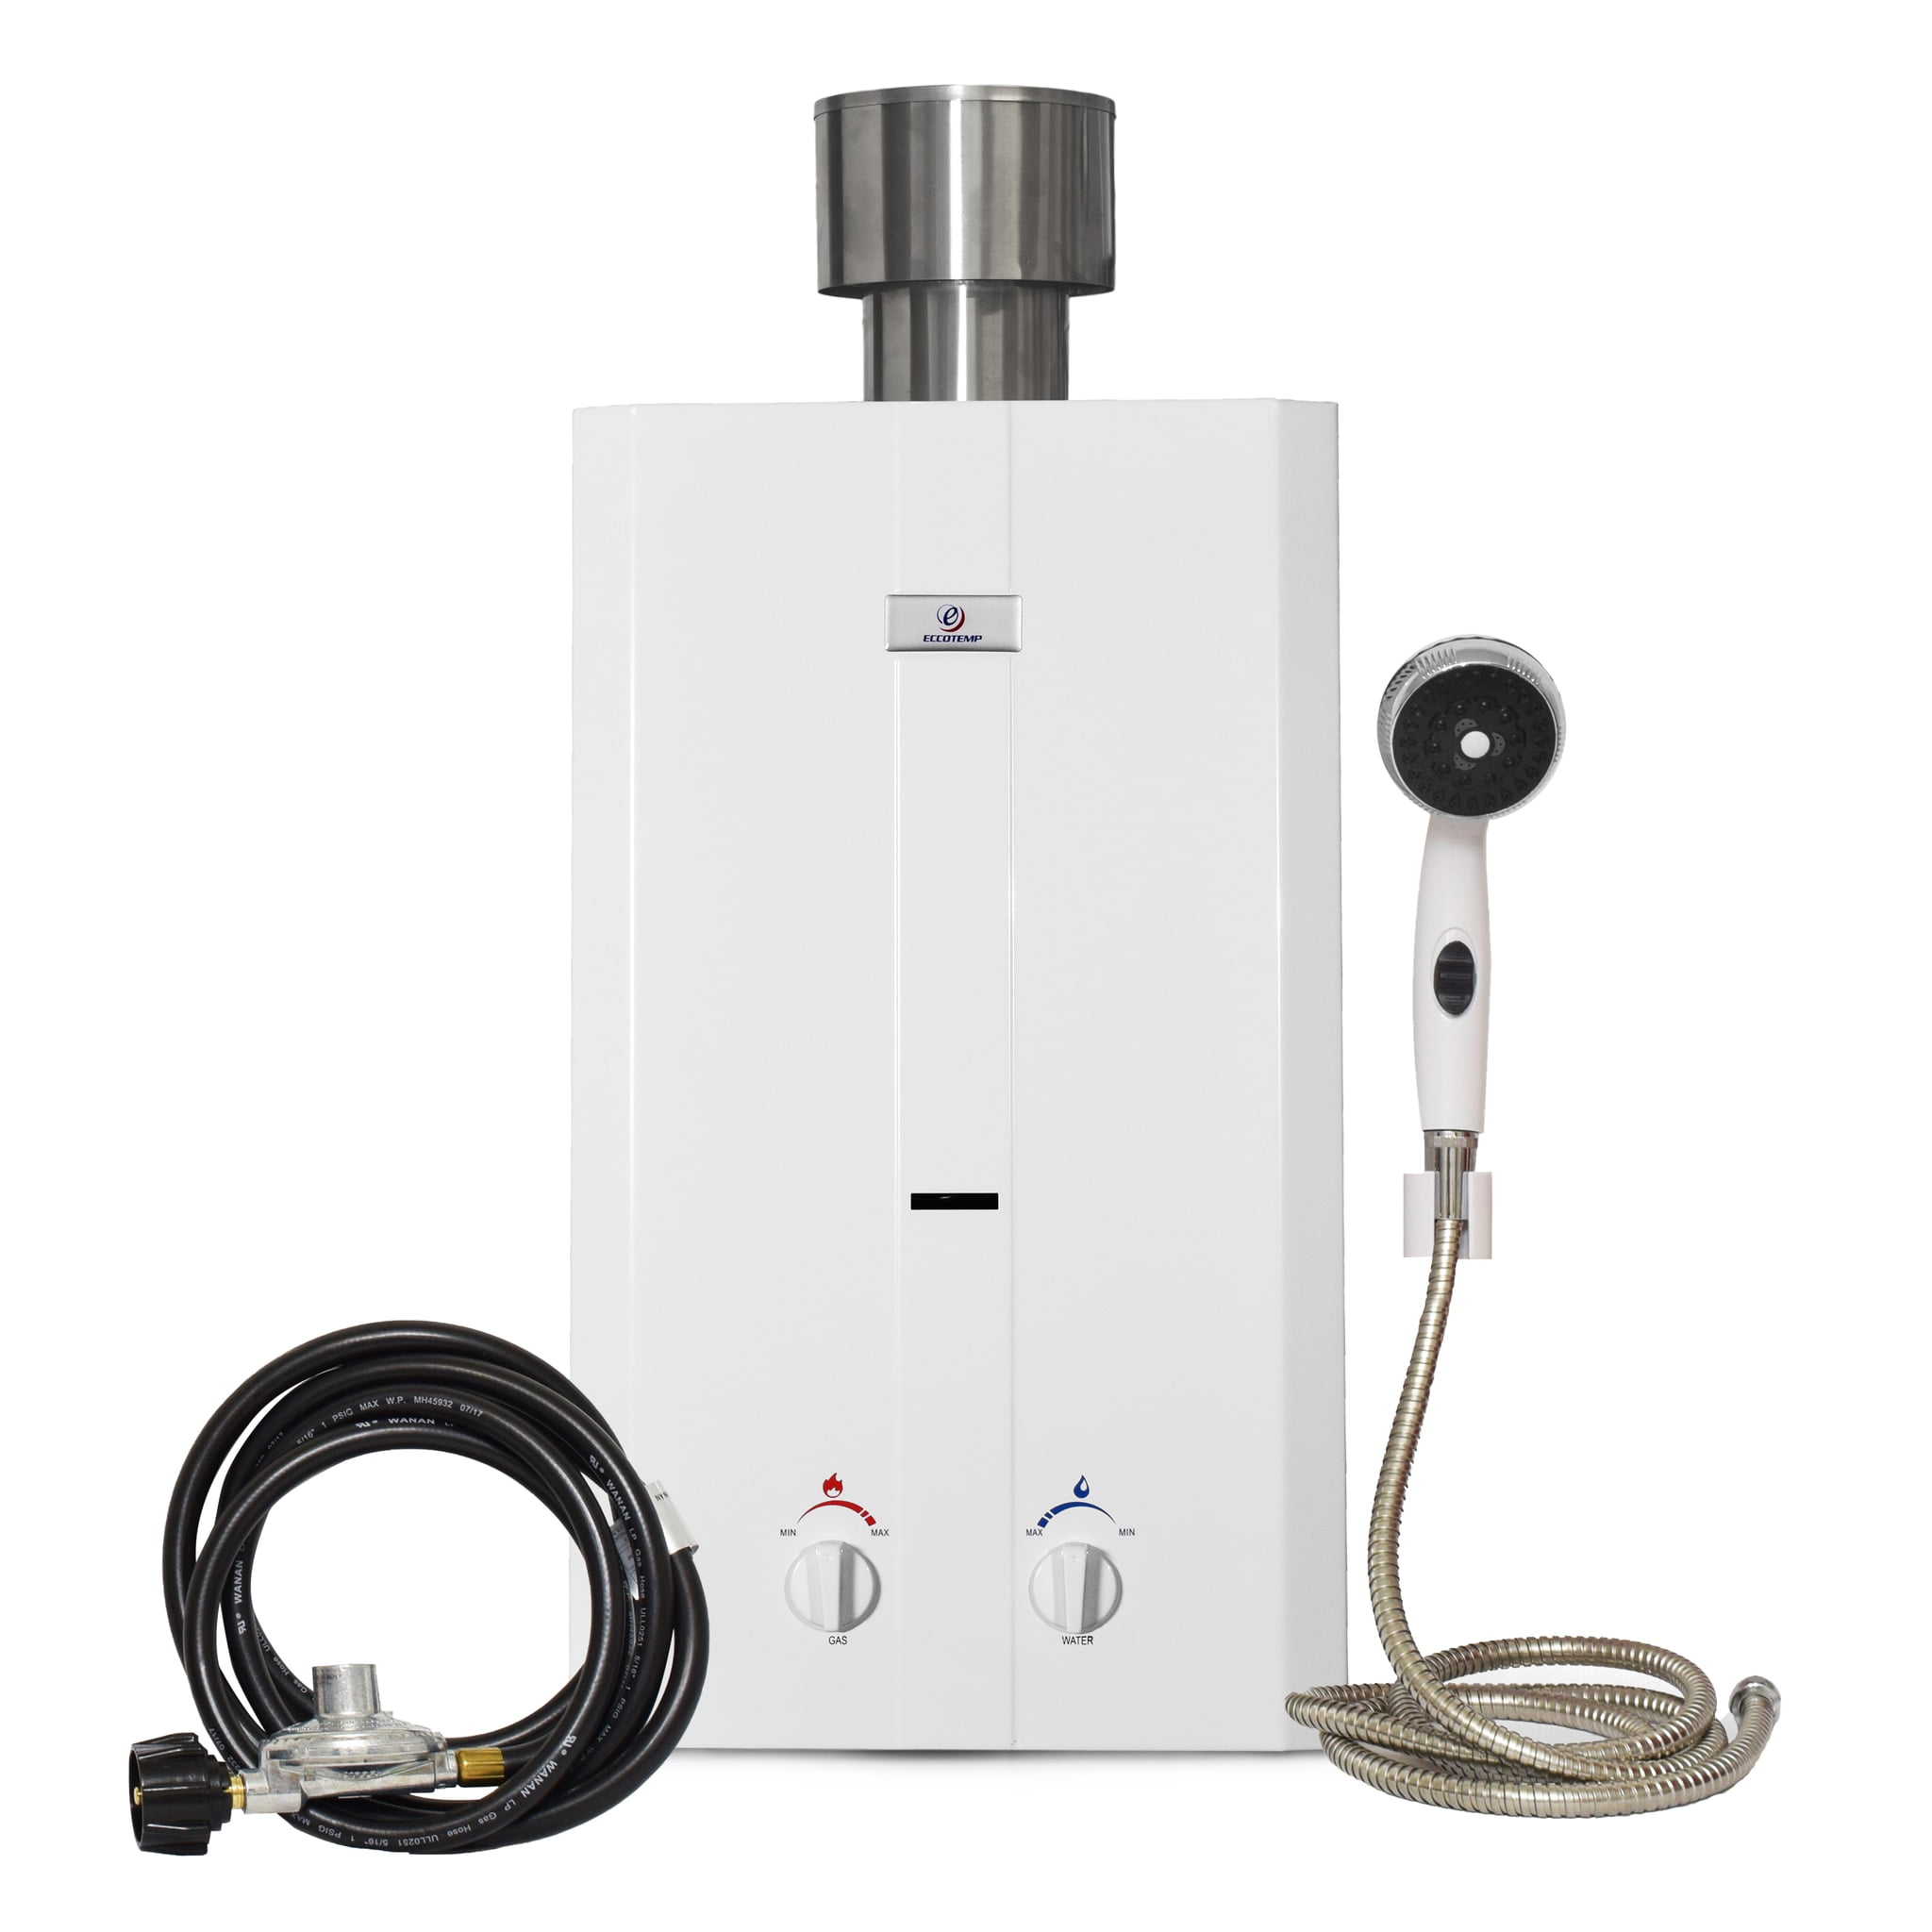 Eccotemp L10 Portable Outdoor Tankless, Best Electric Tankless Water Heater For Outdoor Shower